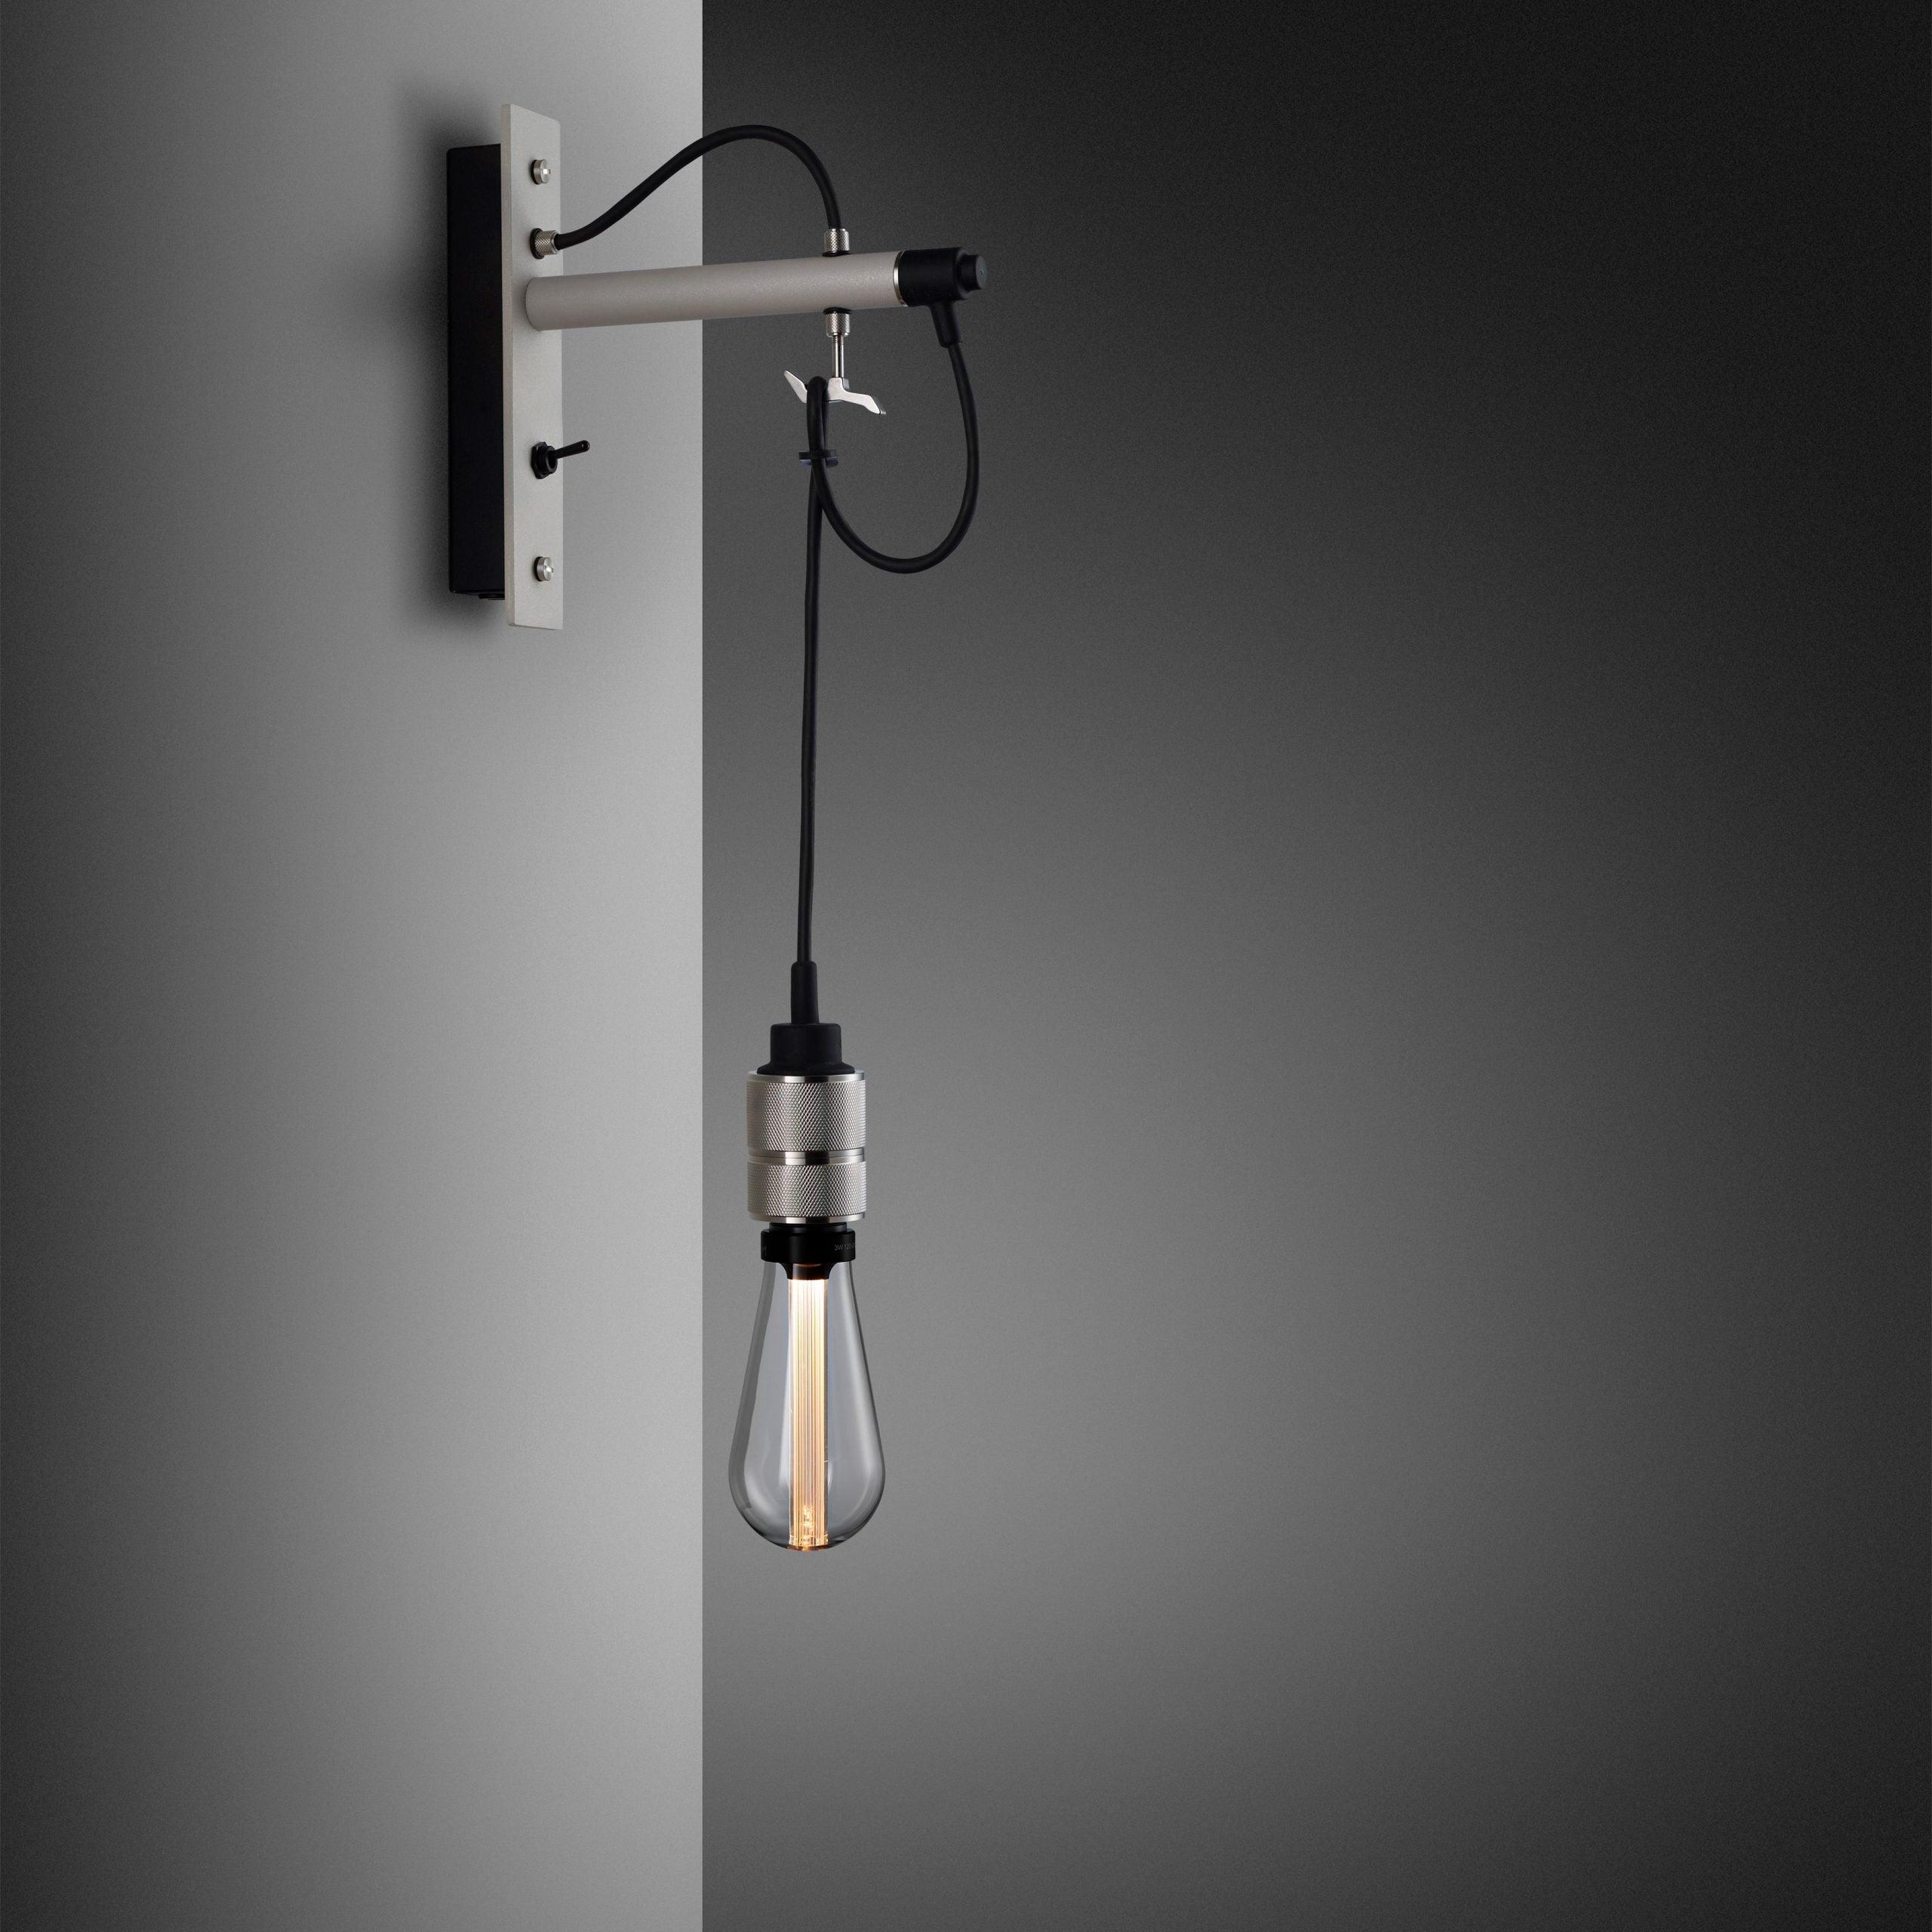 Lampa de perete HOOKED / NUDE / STONE - Buster & Punch - PARIS14A.RO